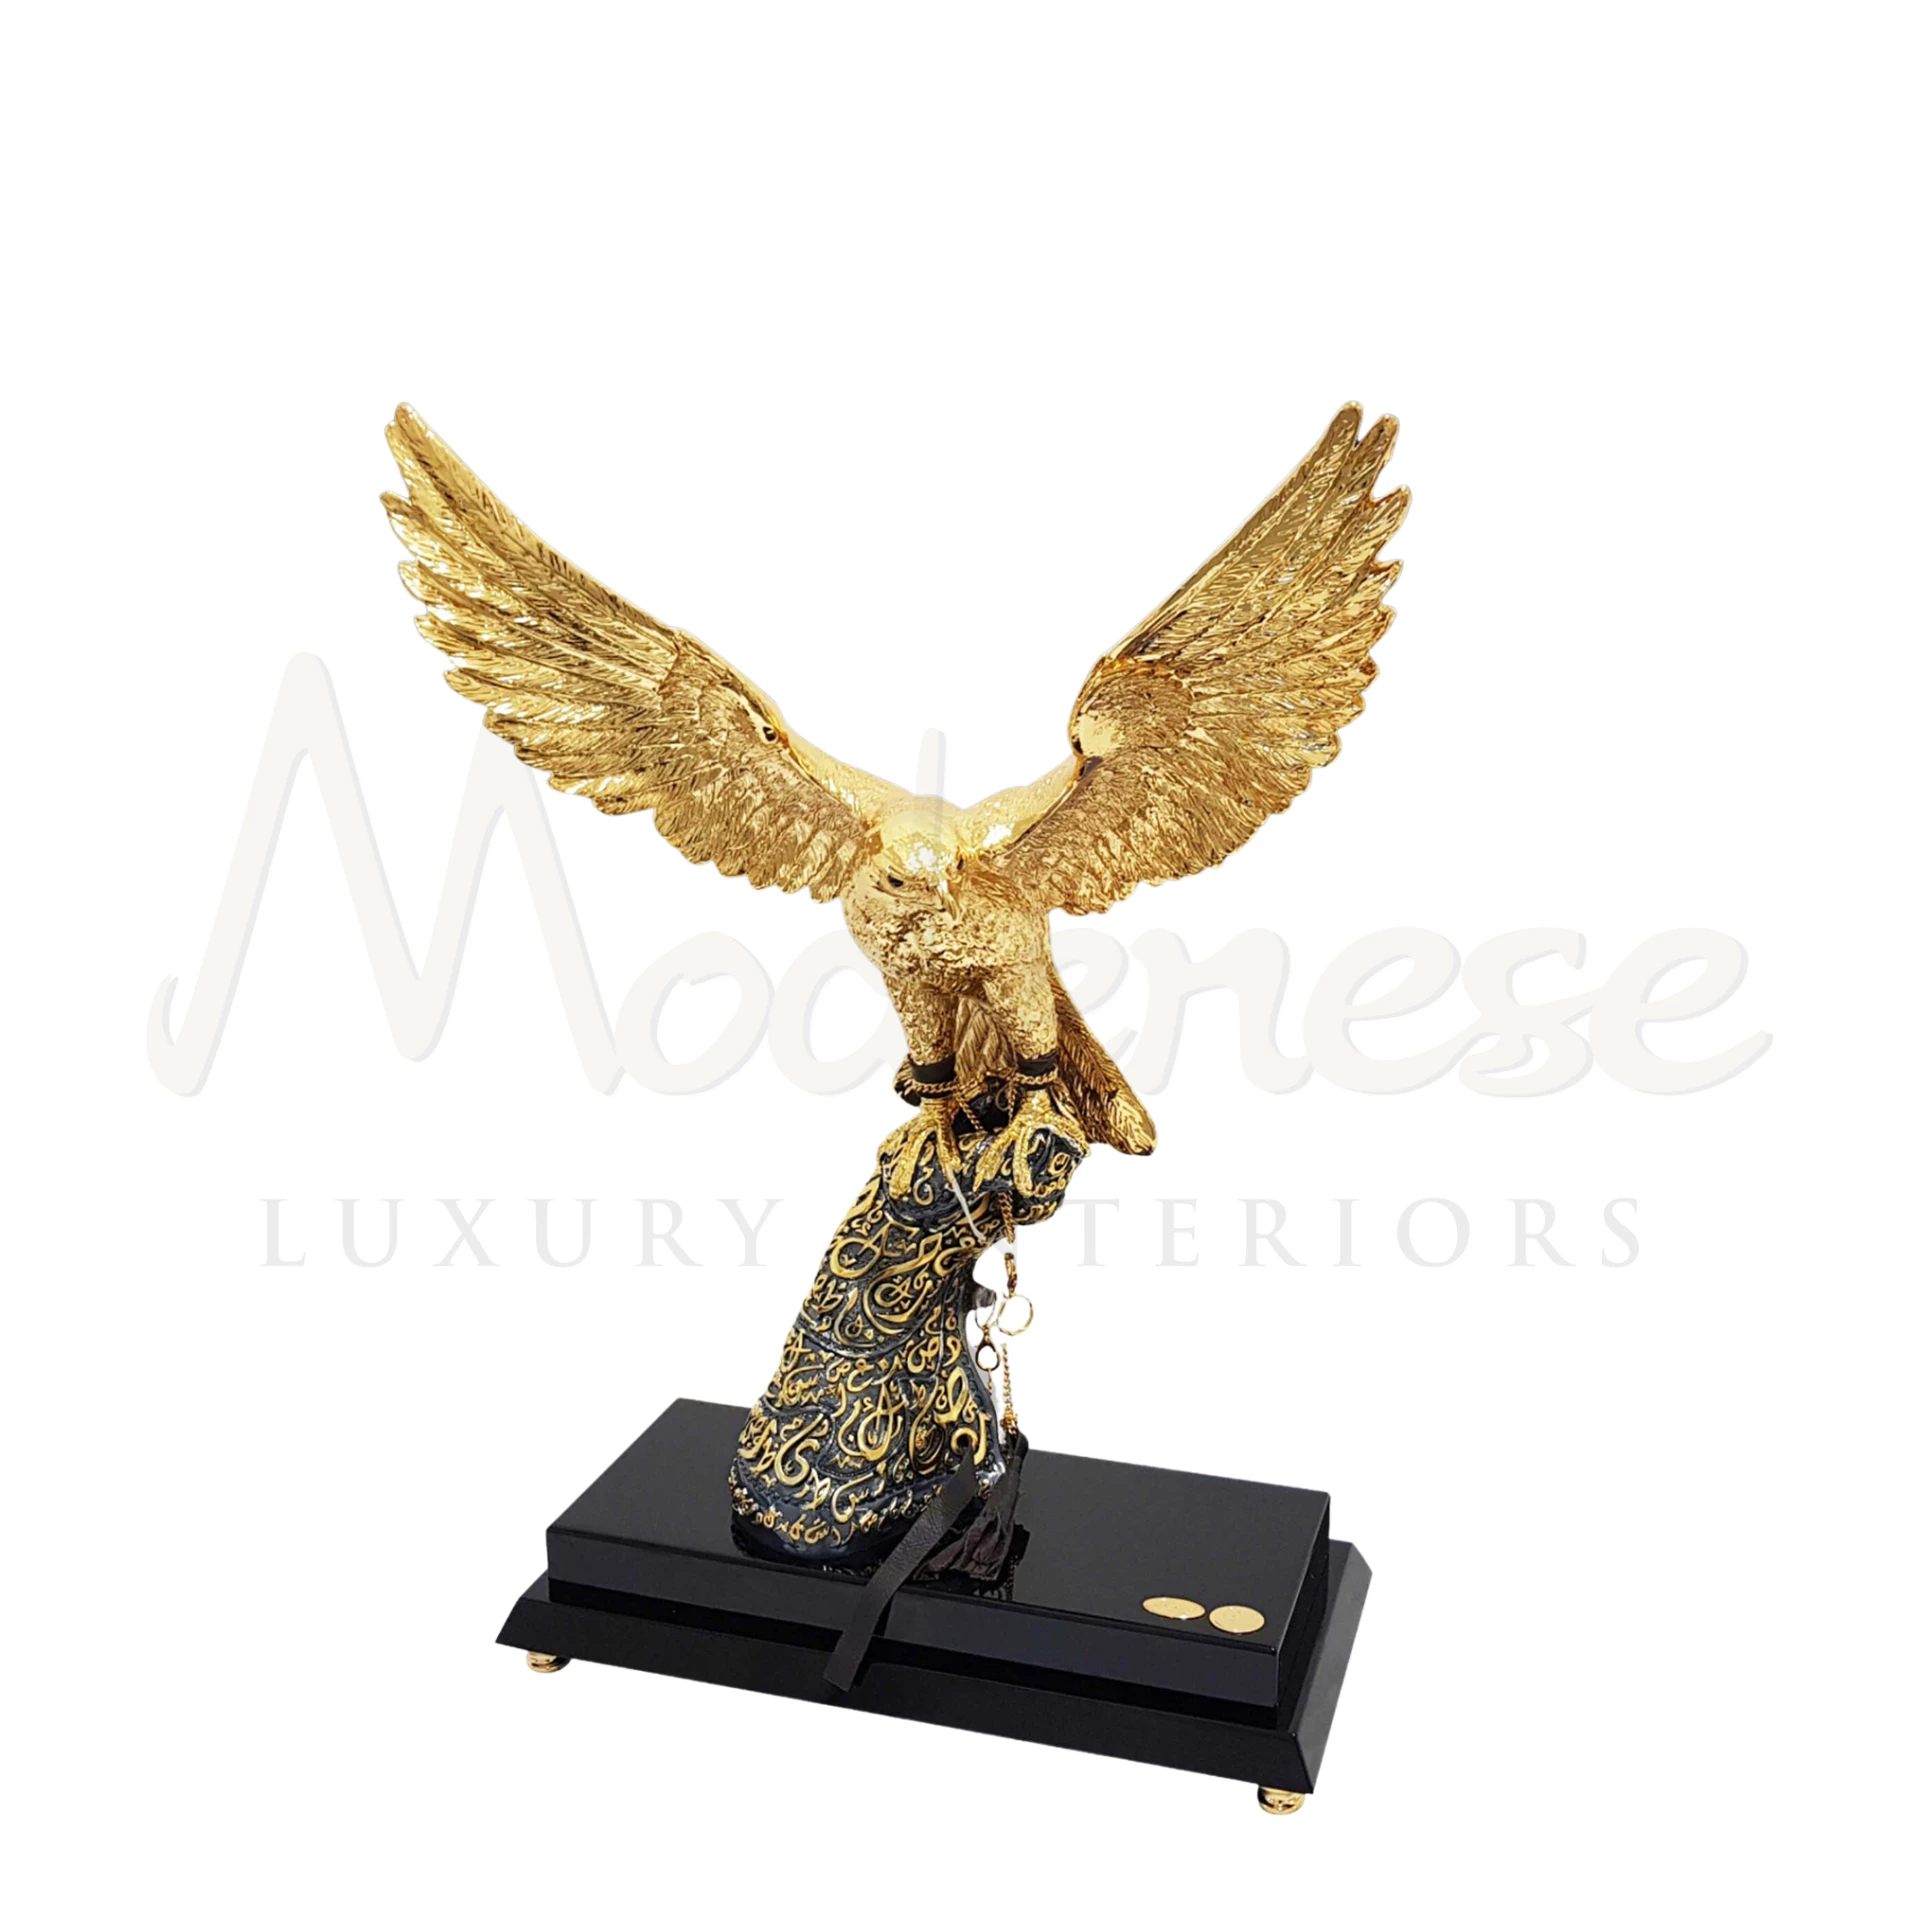 Royal Falcon statue, symbolizing nobility and strength, crafted in bronze, stone, or resin, perfect for adding a touch of royal elegance to luxury home décor.






